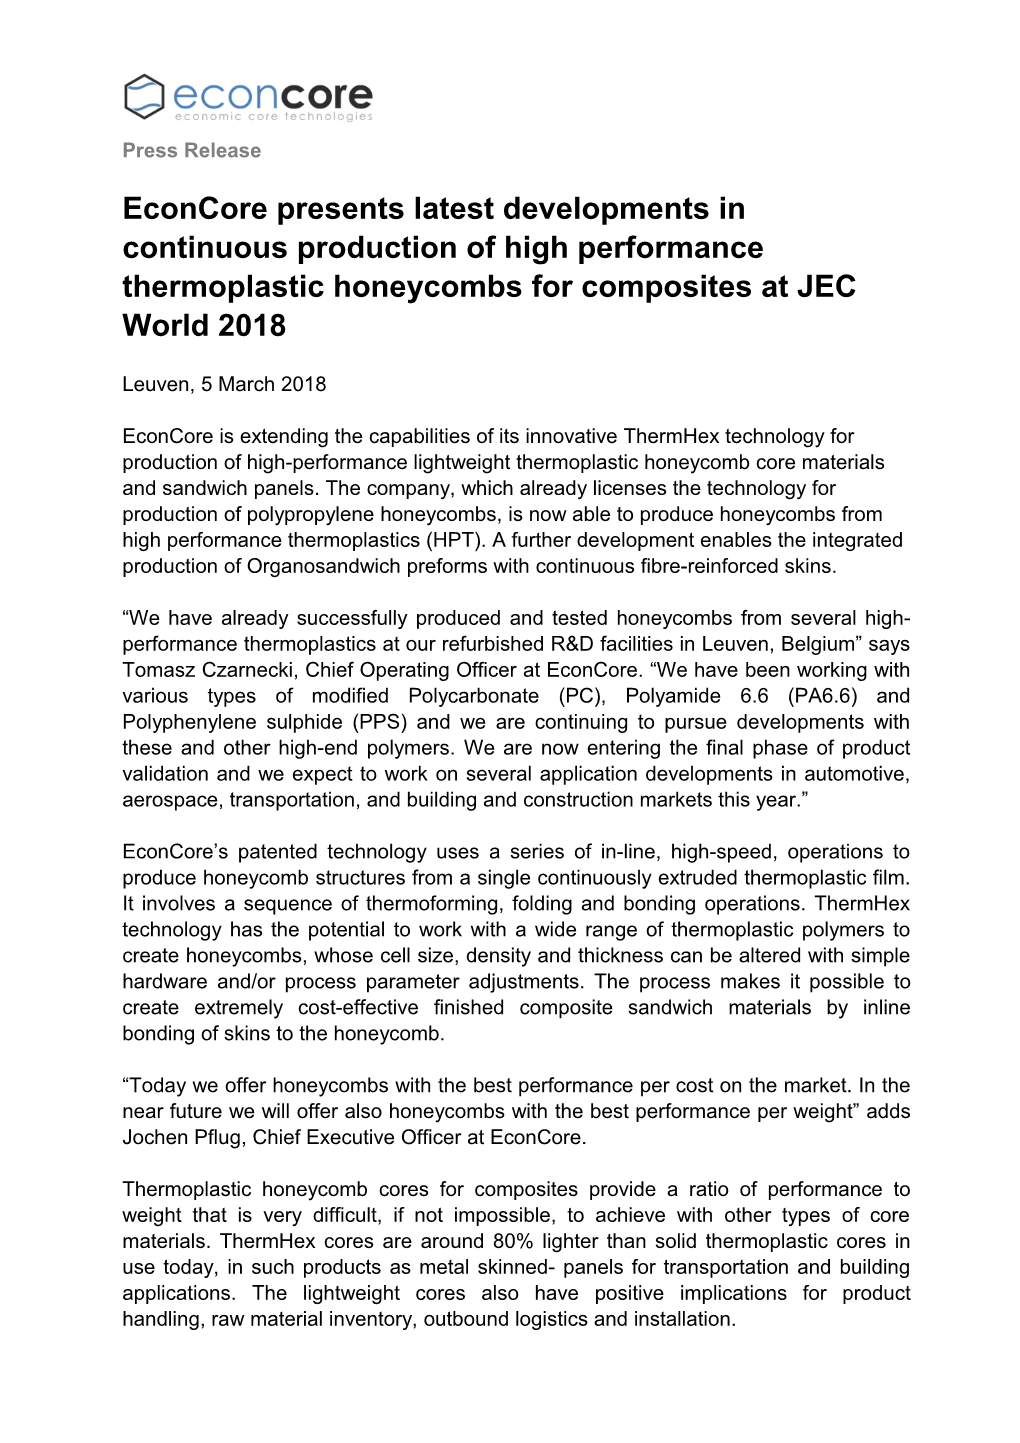 Econcore Presents Latest Developments in Continuous Production of High Performance Thermoplastic